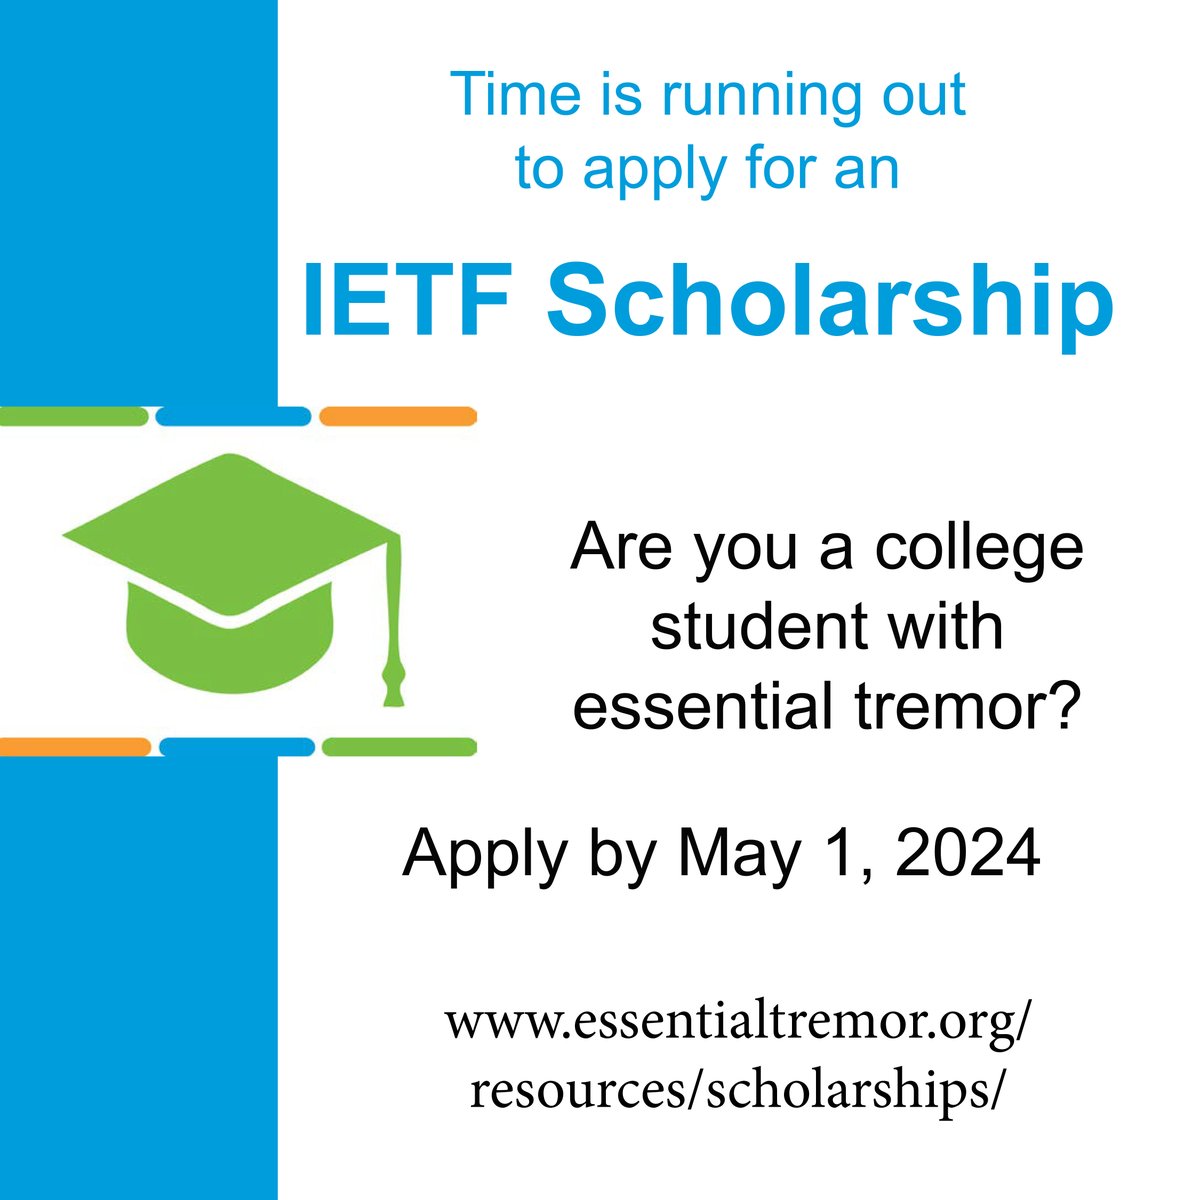 Just a few more days to get your application in for a fall scholarship from the IETF. Each year, we award up to six $3,000 scholarships to current or incoming college students with essential tremor. Learn more on our website. bit.ly/2uFoBQx